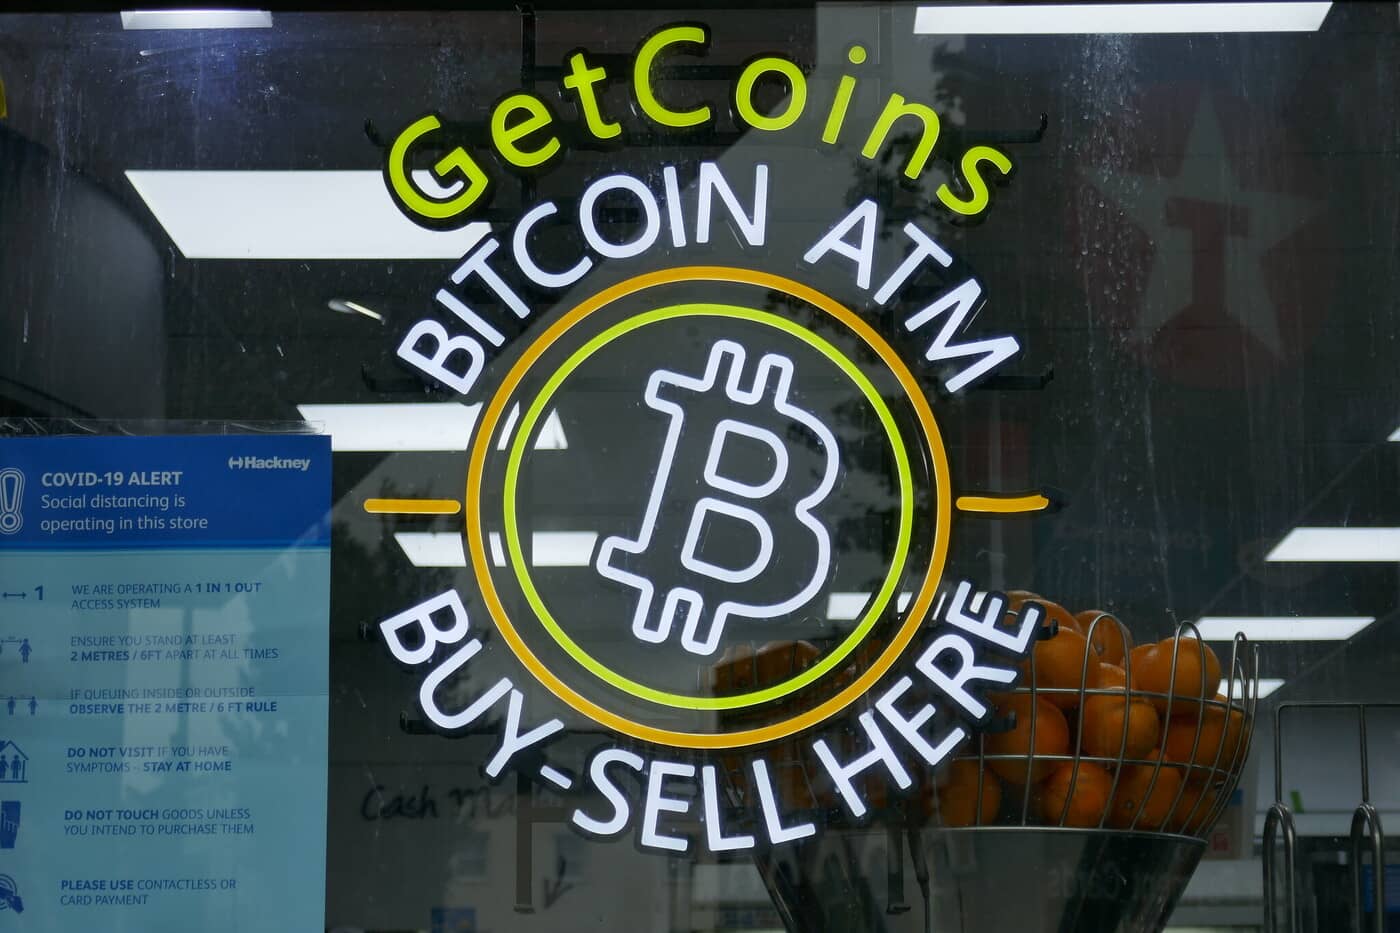 Coinhub To Install 1,000 Bitcoin ATMs At Gas Stations And Retail Stores